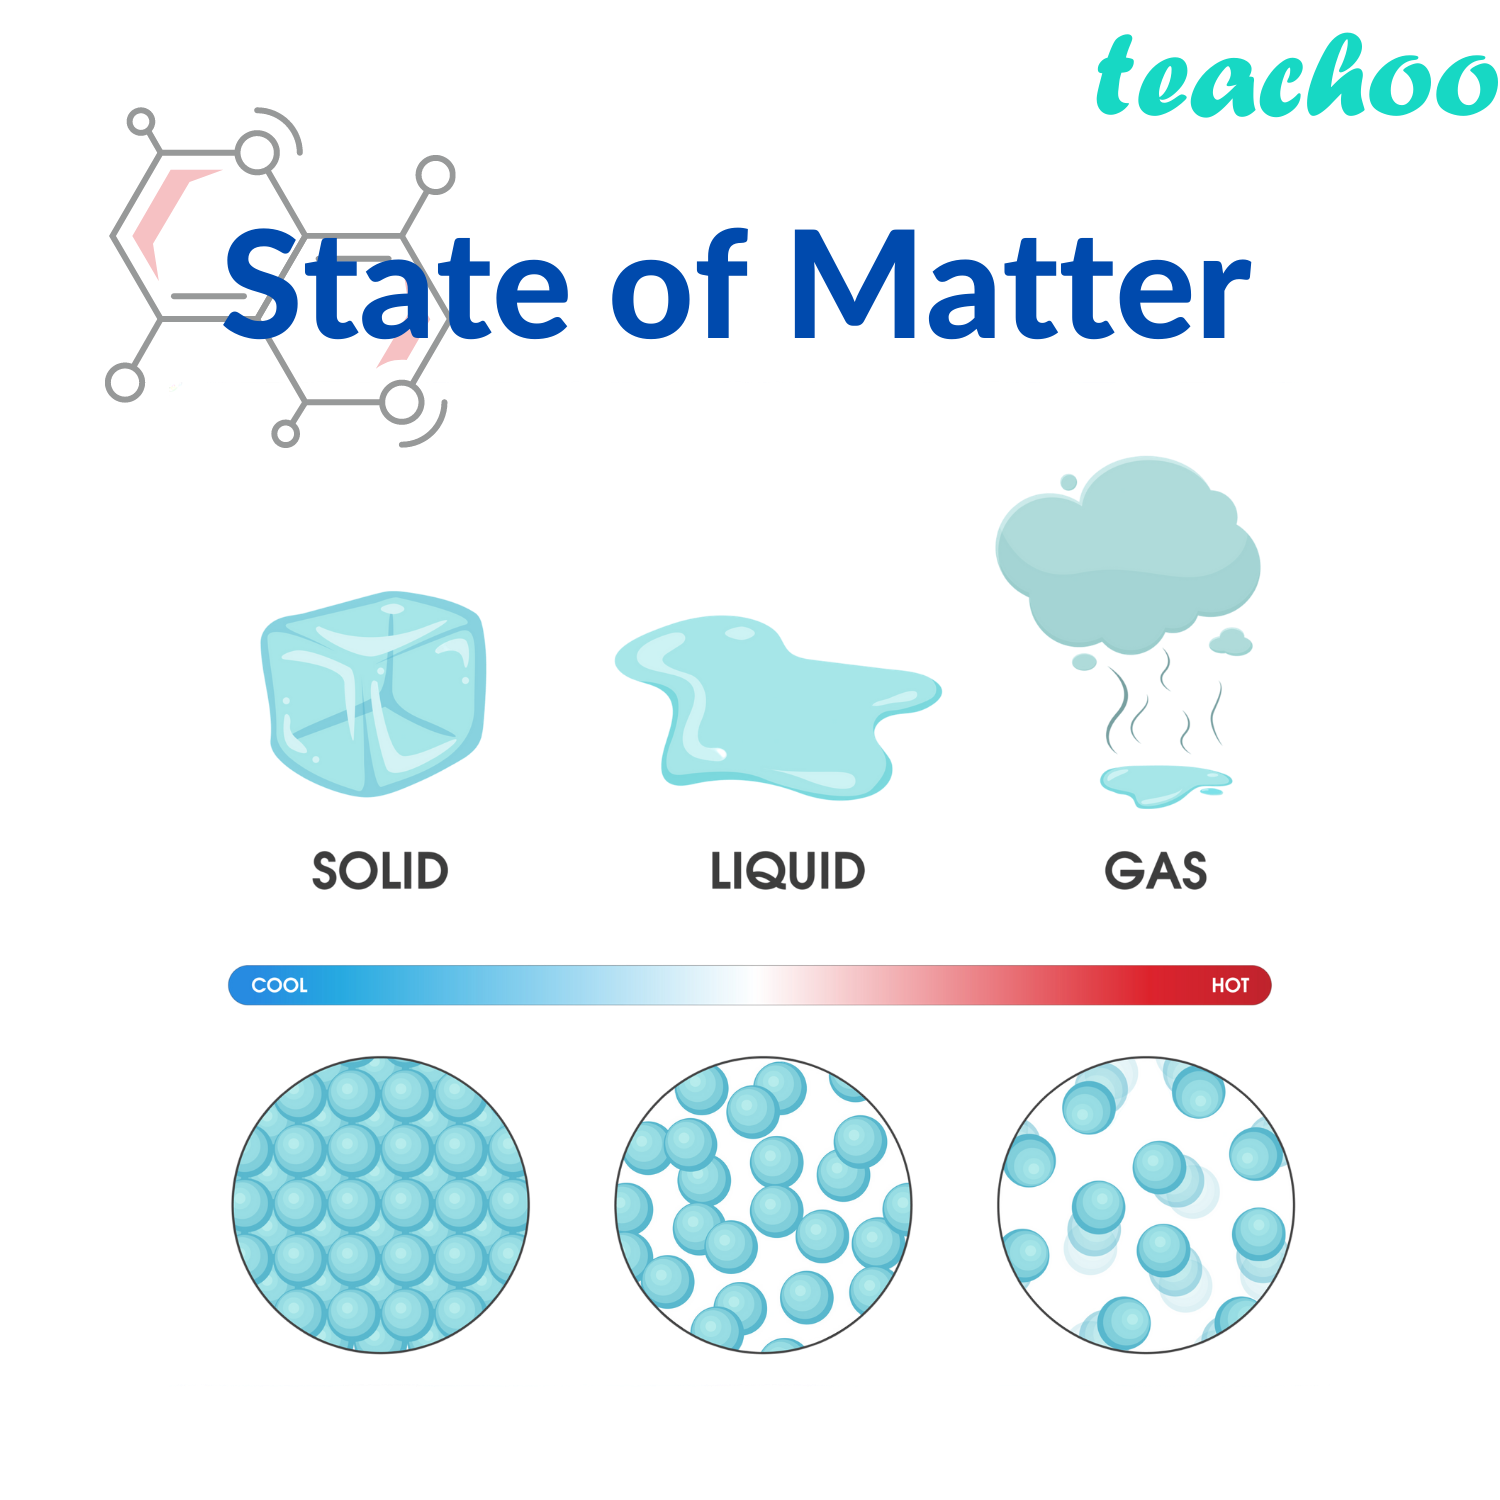 effect-of-temperature-to-change-state-of-matter-teachoo-science